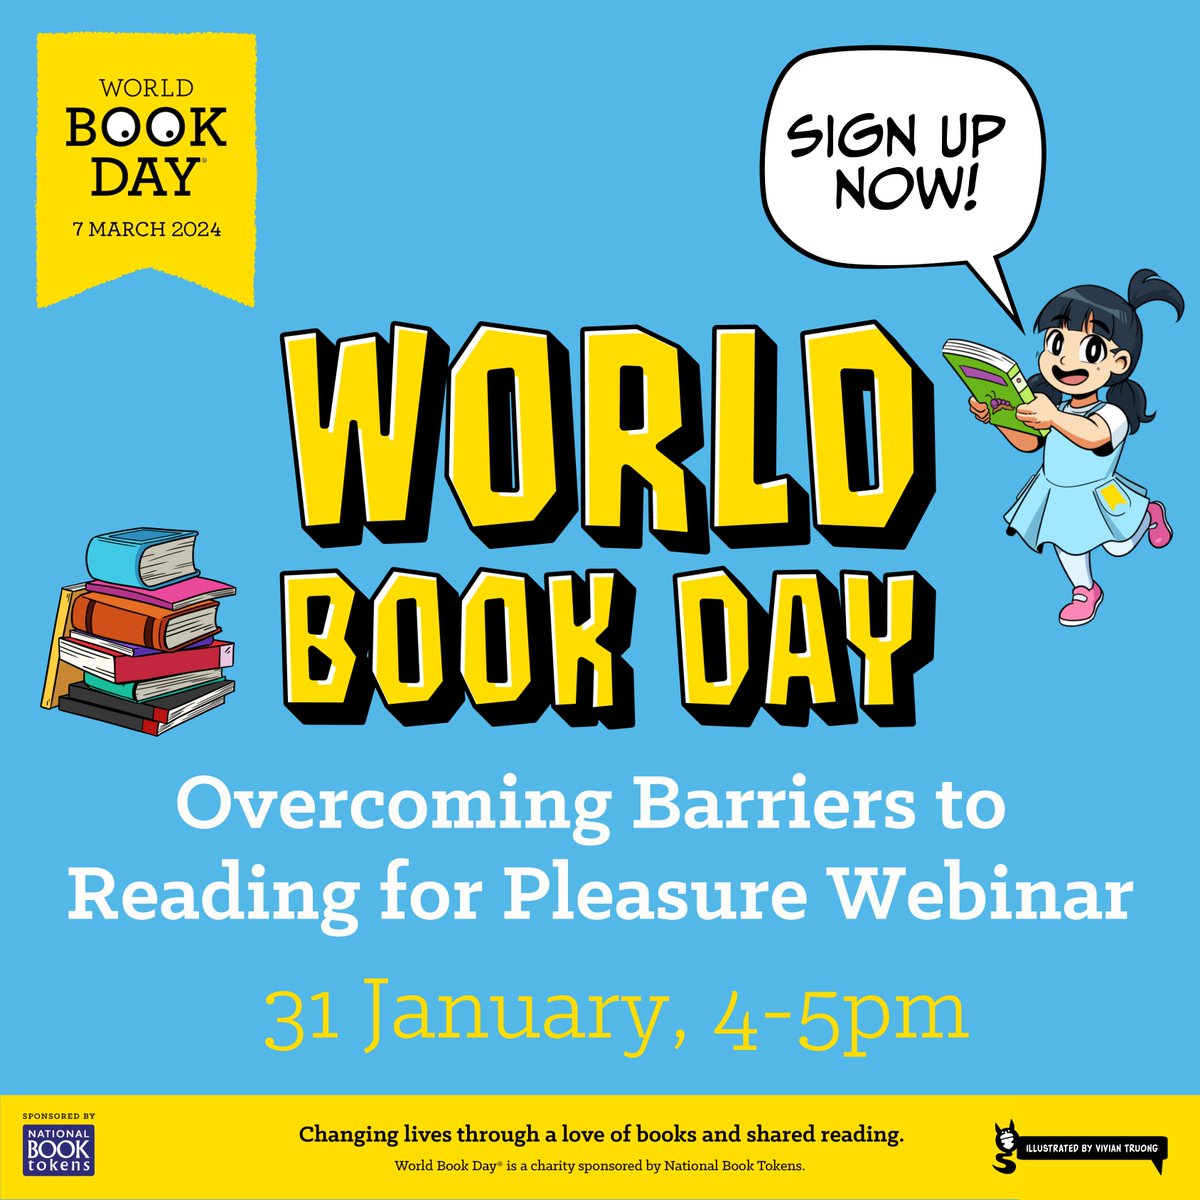 Thank you to everyone who attended our Preparing for World Book Day 2024 webinar last week! Our next webinar for educators takes place next Wednesday - book your free place and watch the recording of last week’s webinar here: worldbookday.com/events/